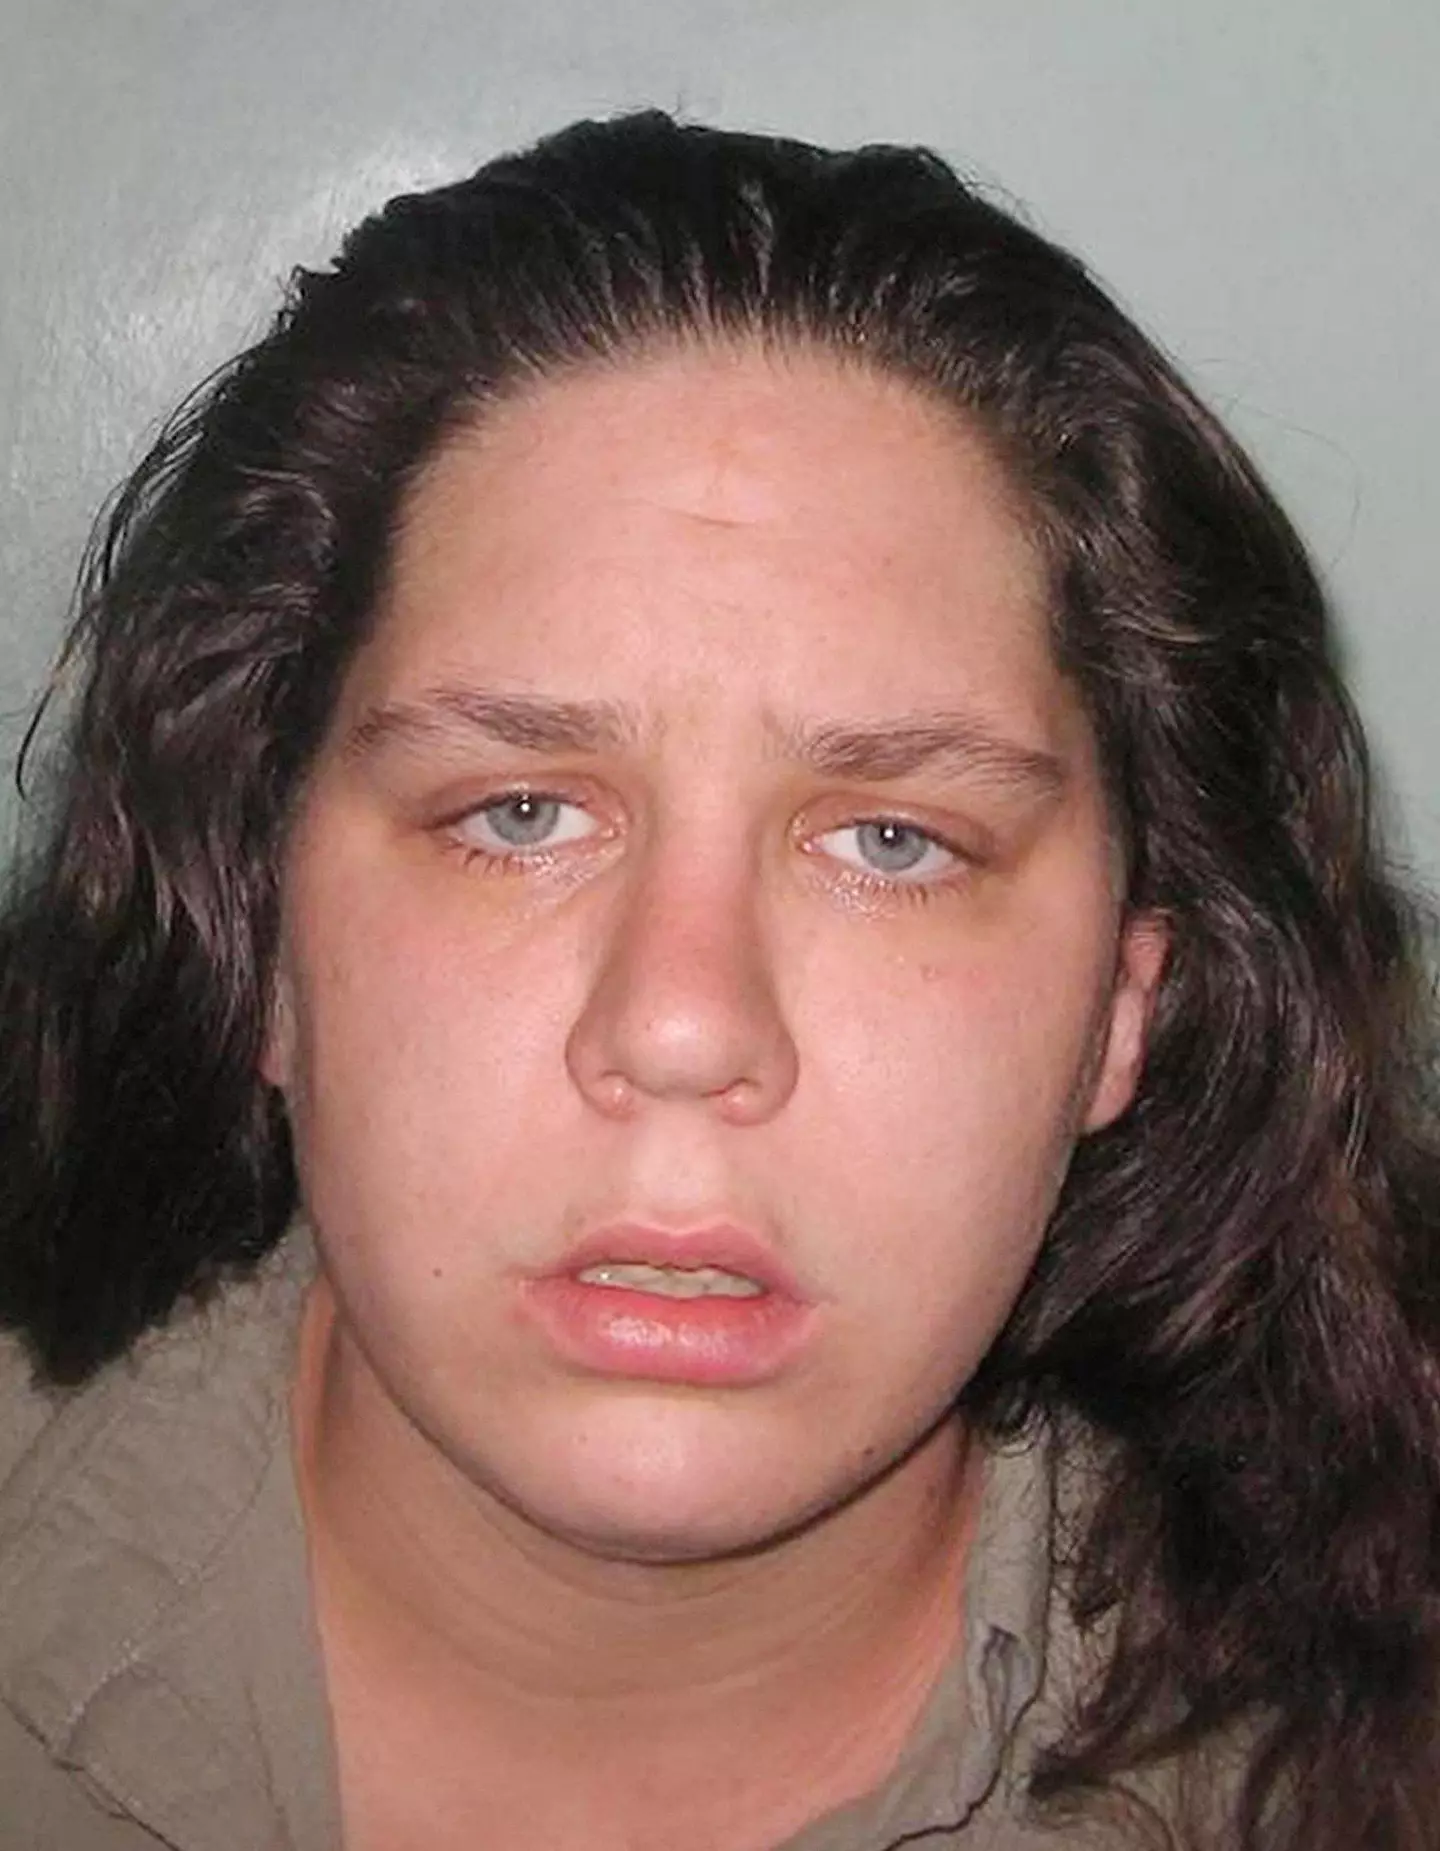 Tracey Connelly was convicted for the death of her son, 'Baby P'.